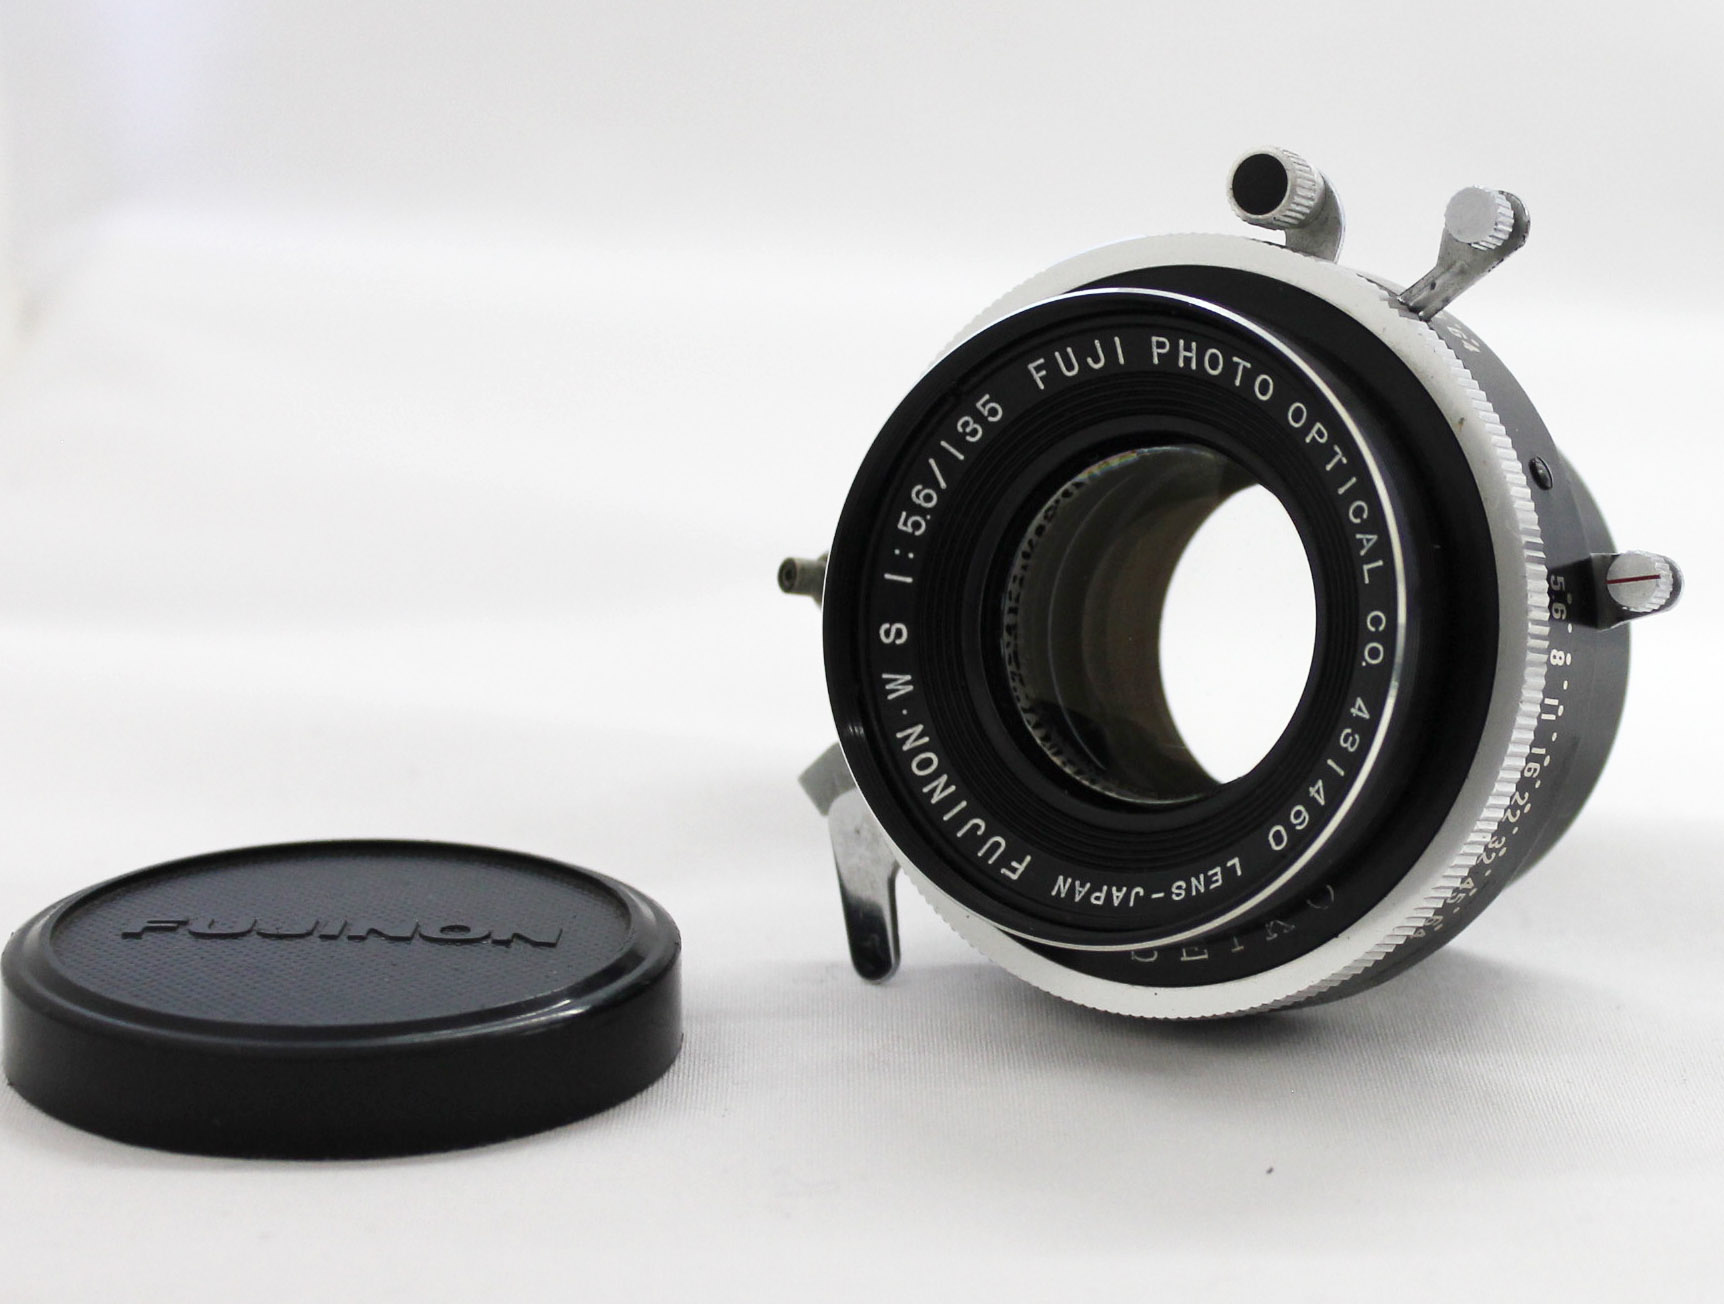 Japan Used Camera Shop | Fuji Fujinon W S 135mm F/5.6 4x5 Large Format Lens with Seiko Shutter from Japan